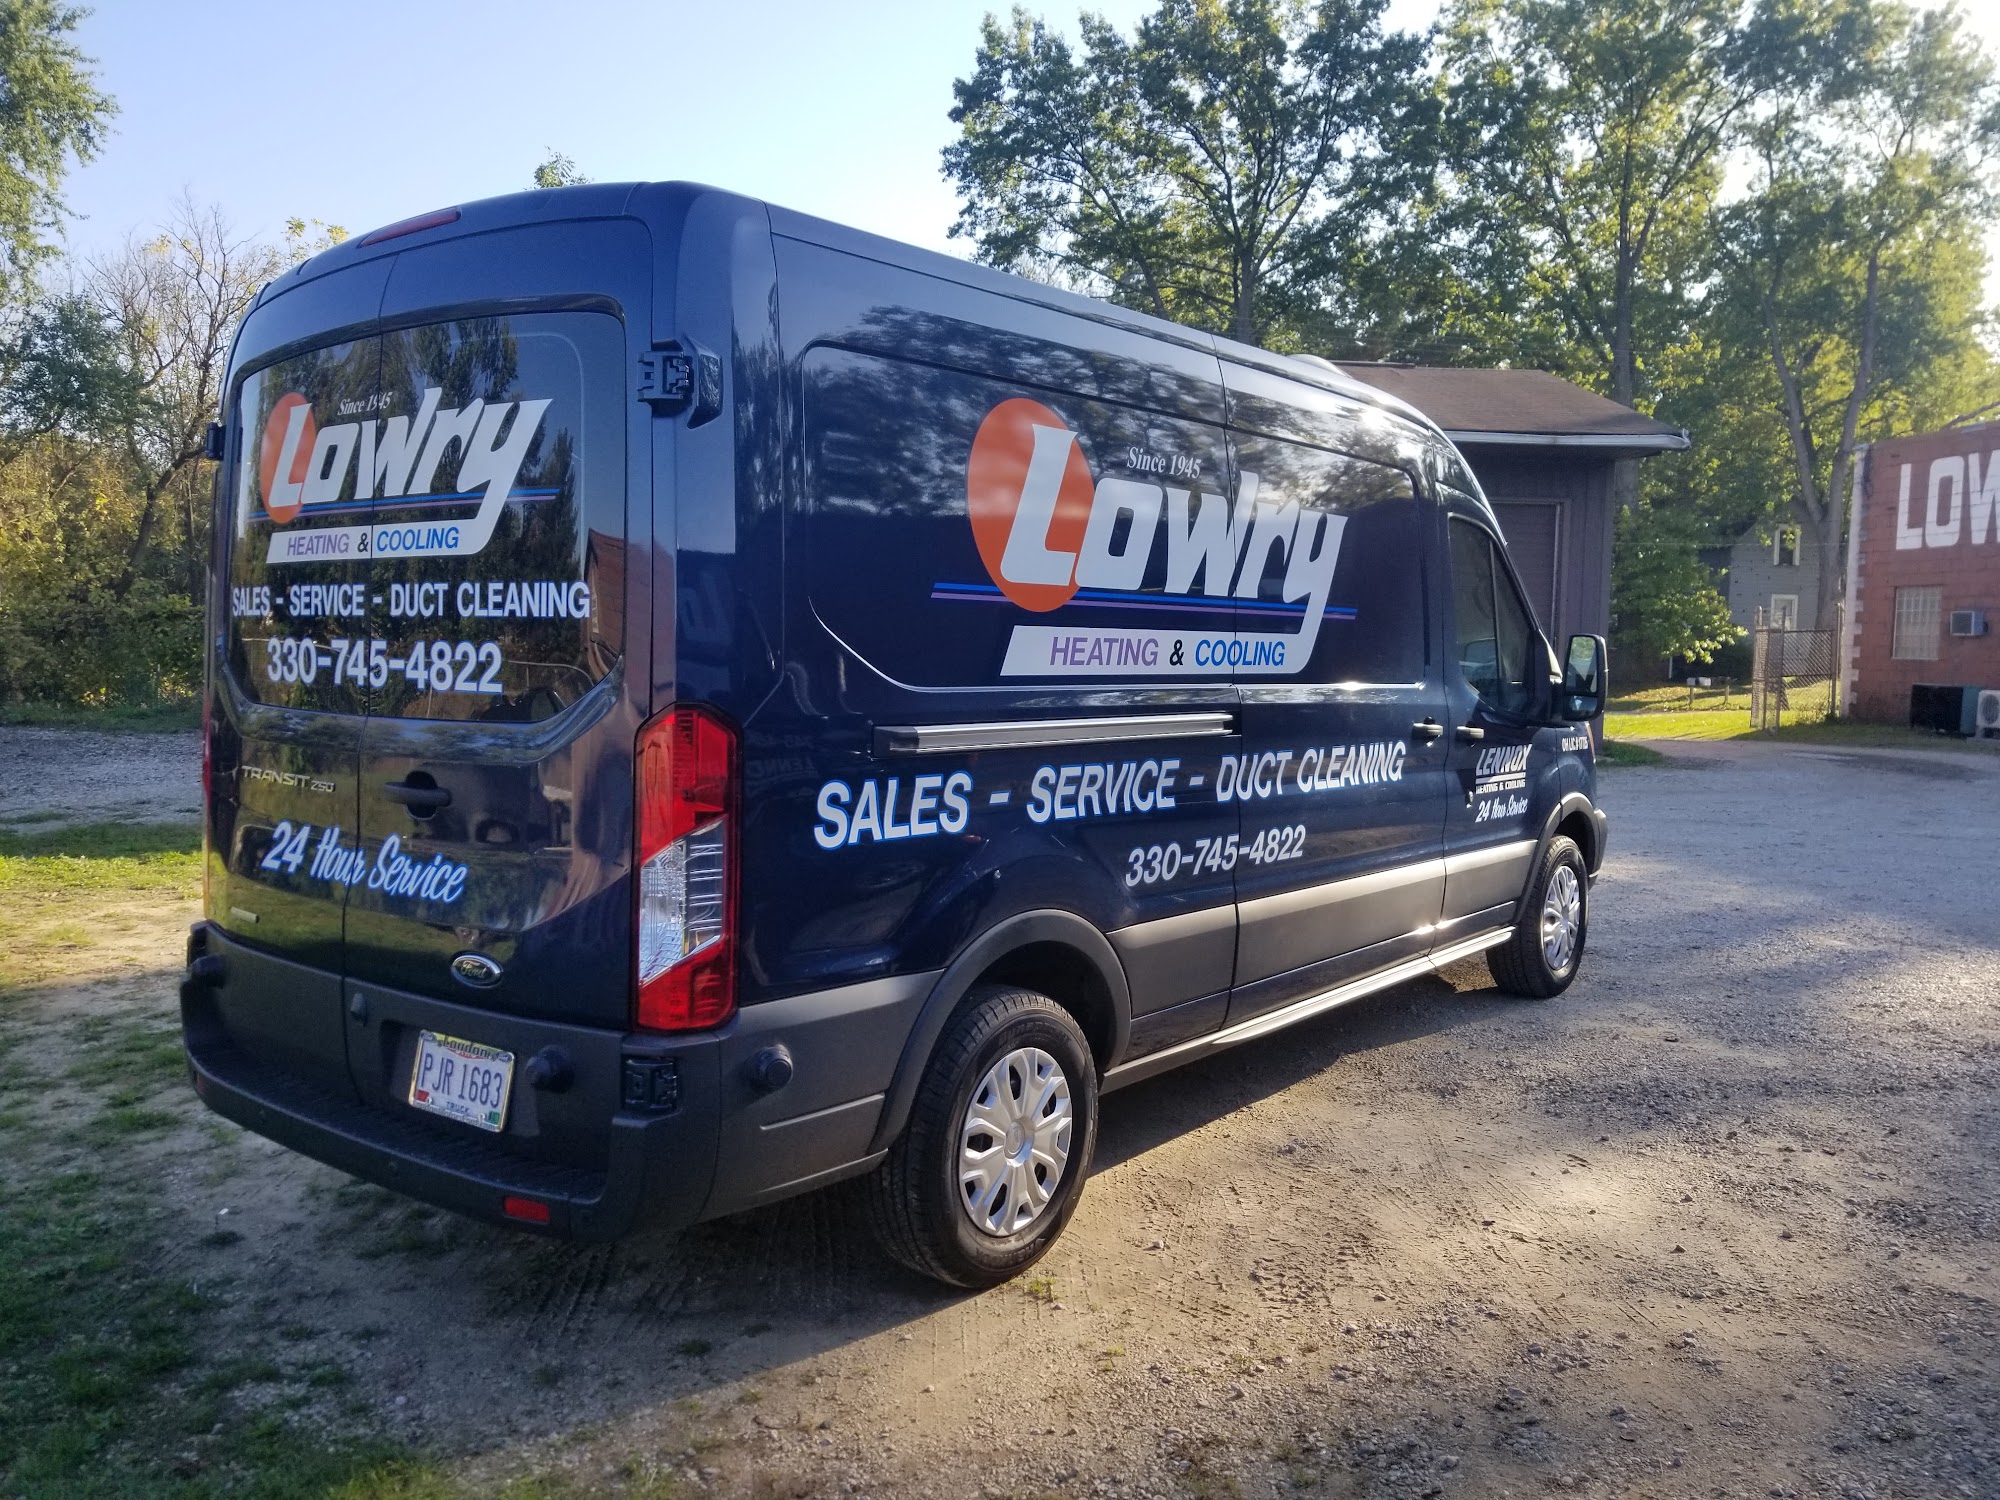 Lowry Heating & Cooling